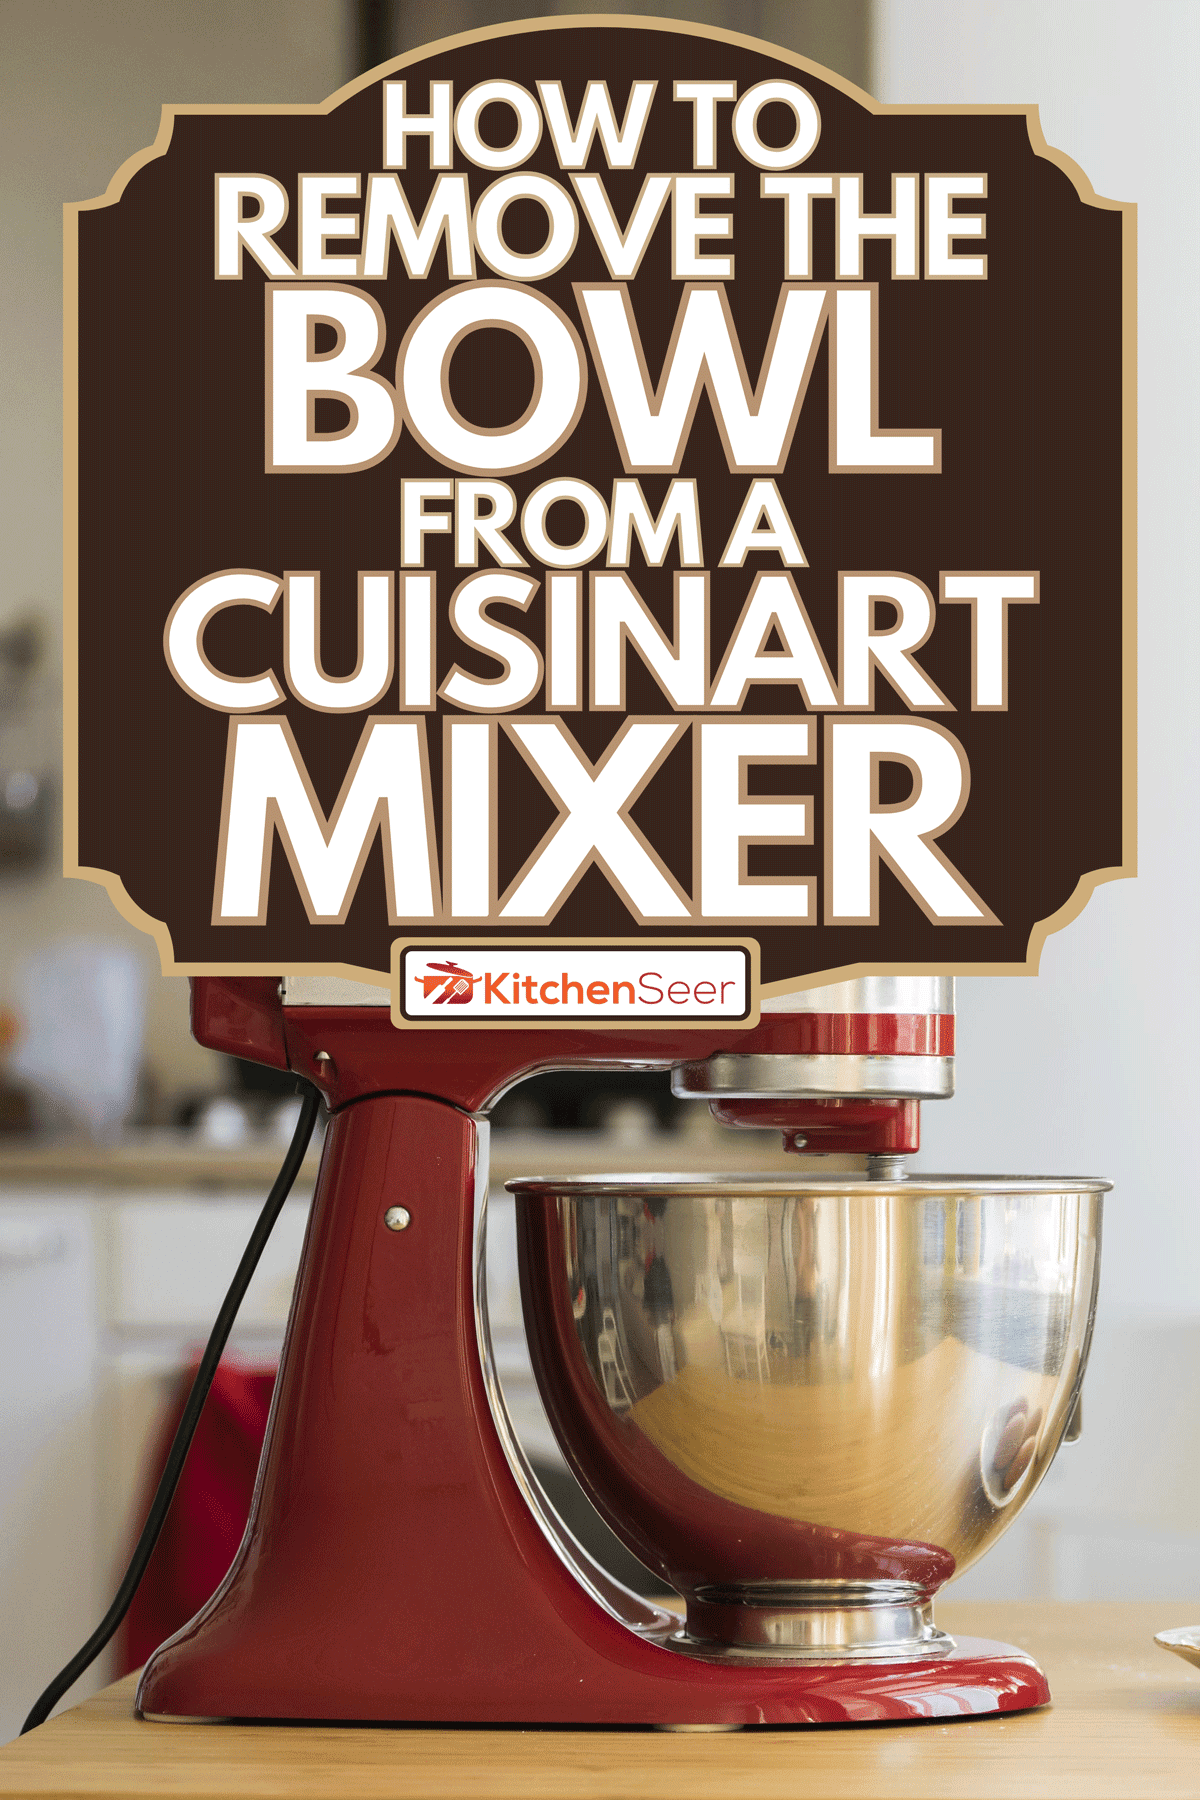 A red stand mixer mixing cream, How To Remove the Bowl From a Cuisinart Mixer